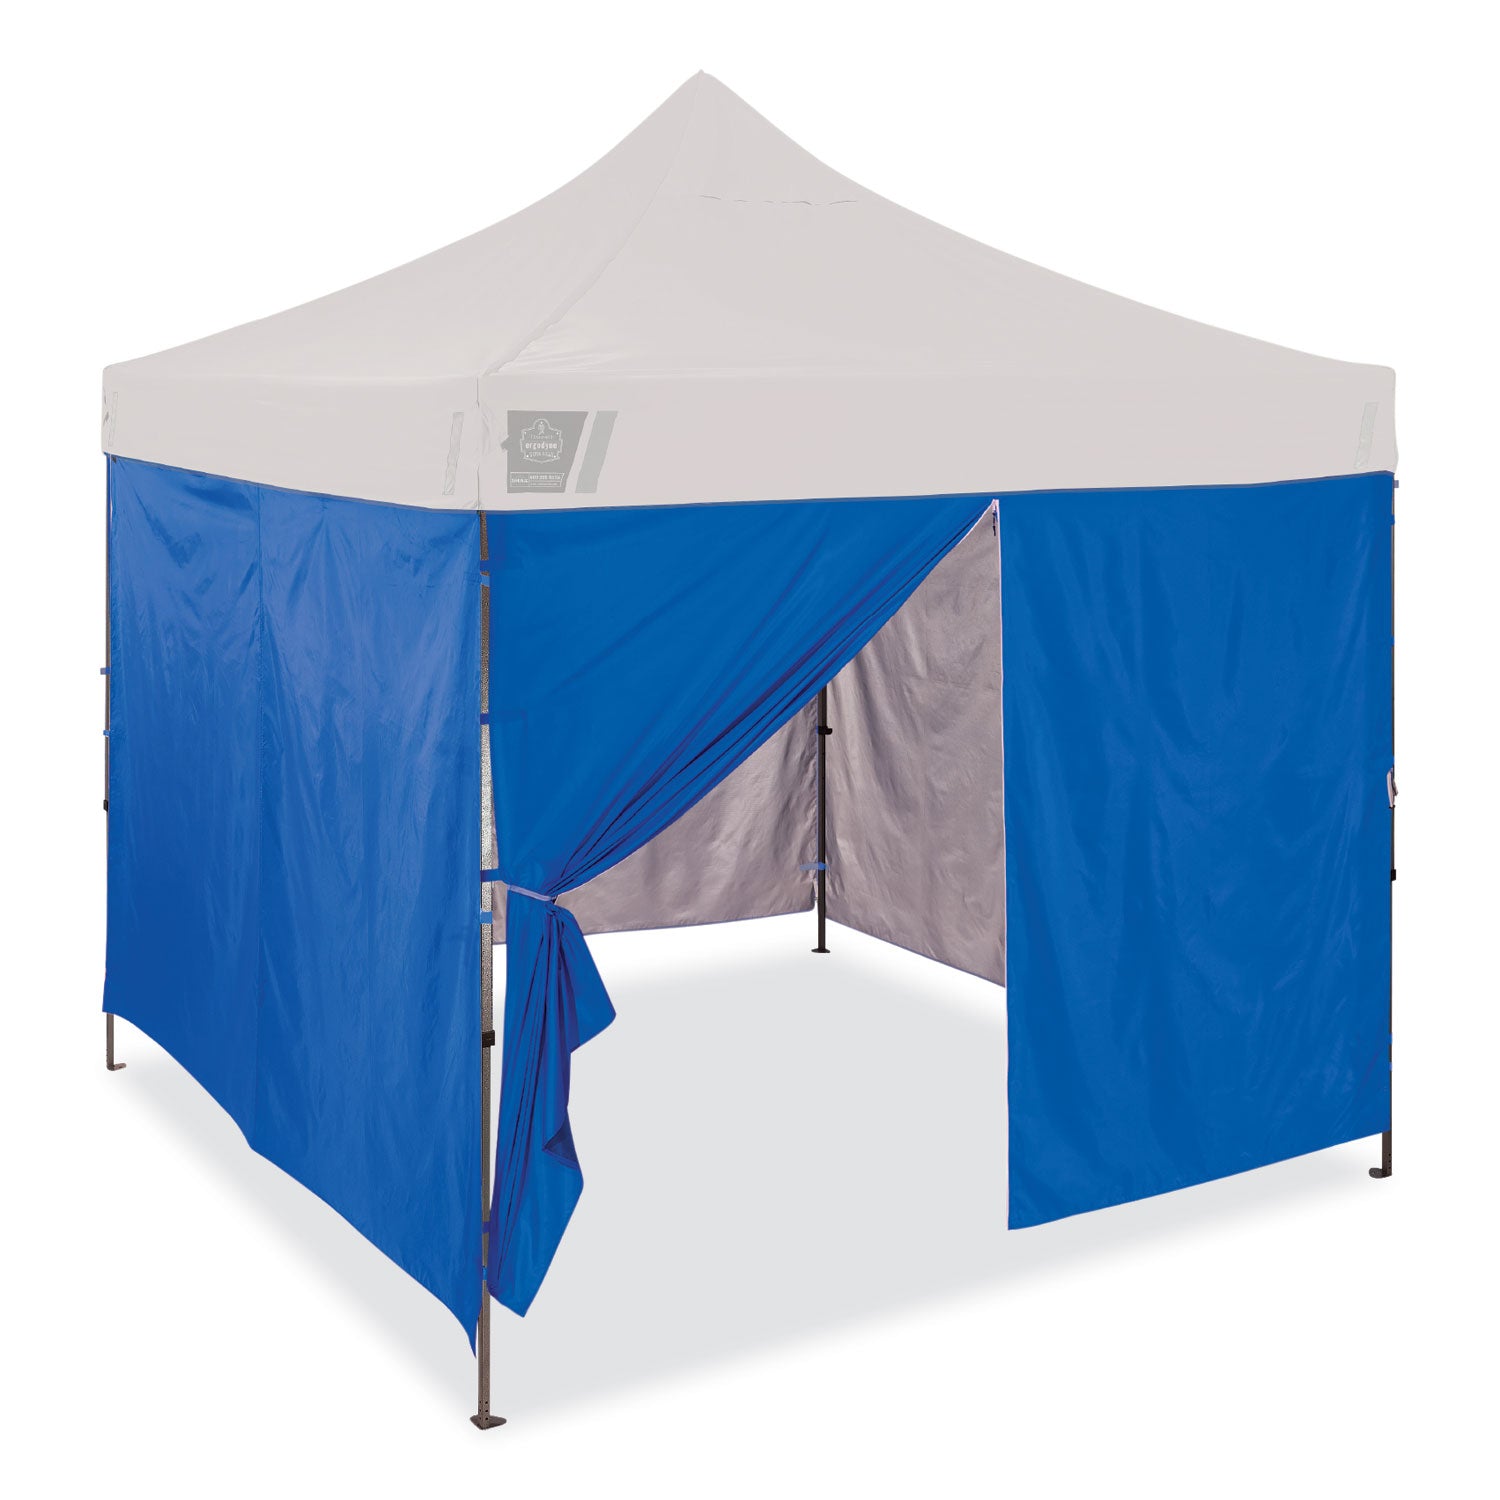 shax-6054-pop-up-tent-sidewall-kit-single-skin-10-ft-x-10-ft-polyester-blue-ships-in-1-3-business-days_ego12985 - 1